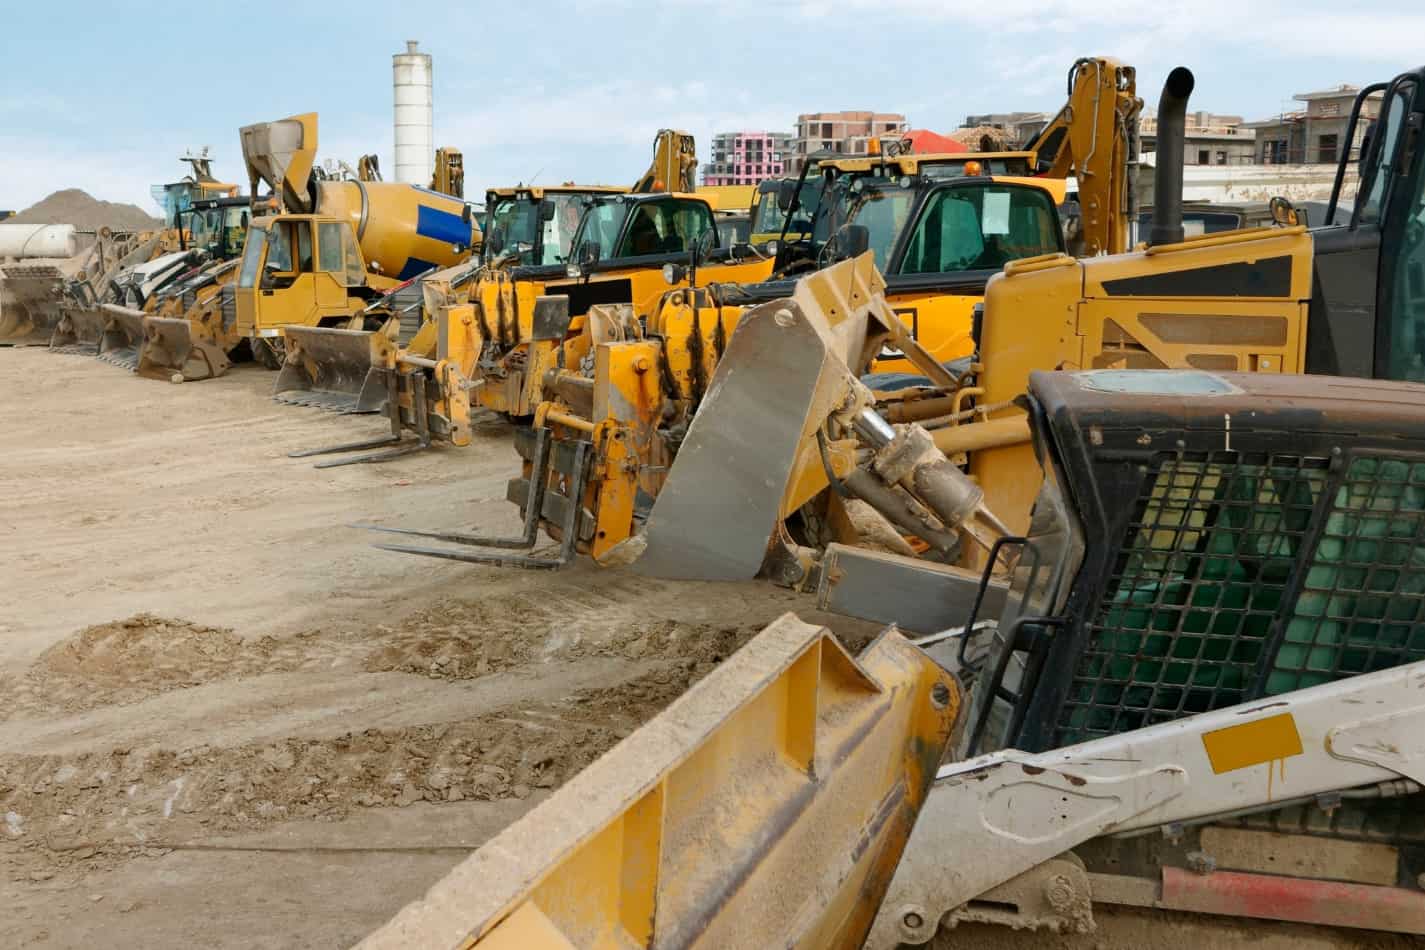 How Time-Consuming Is Heavy Equipment Operator Training?